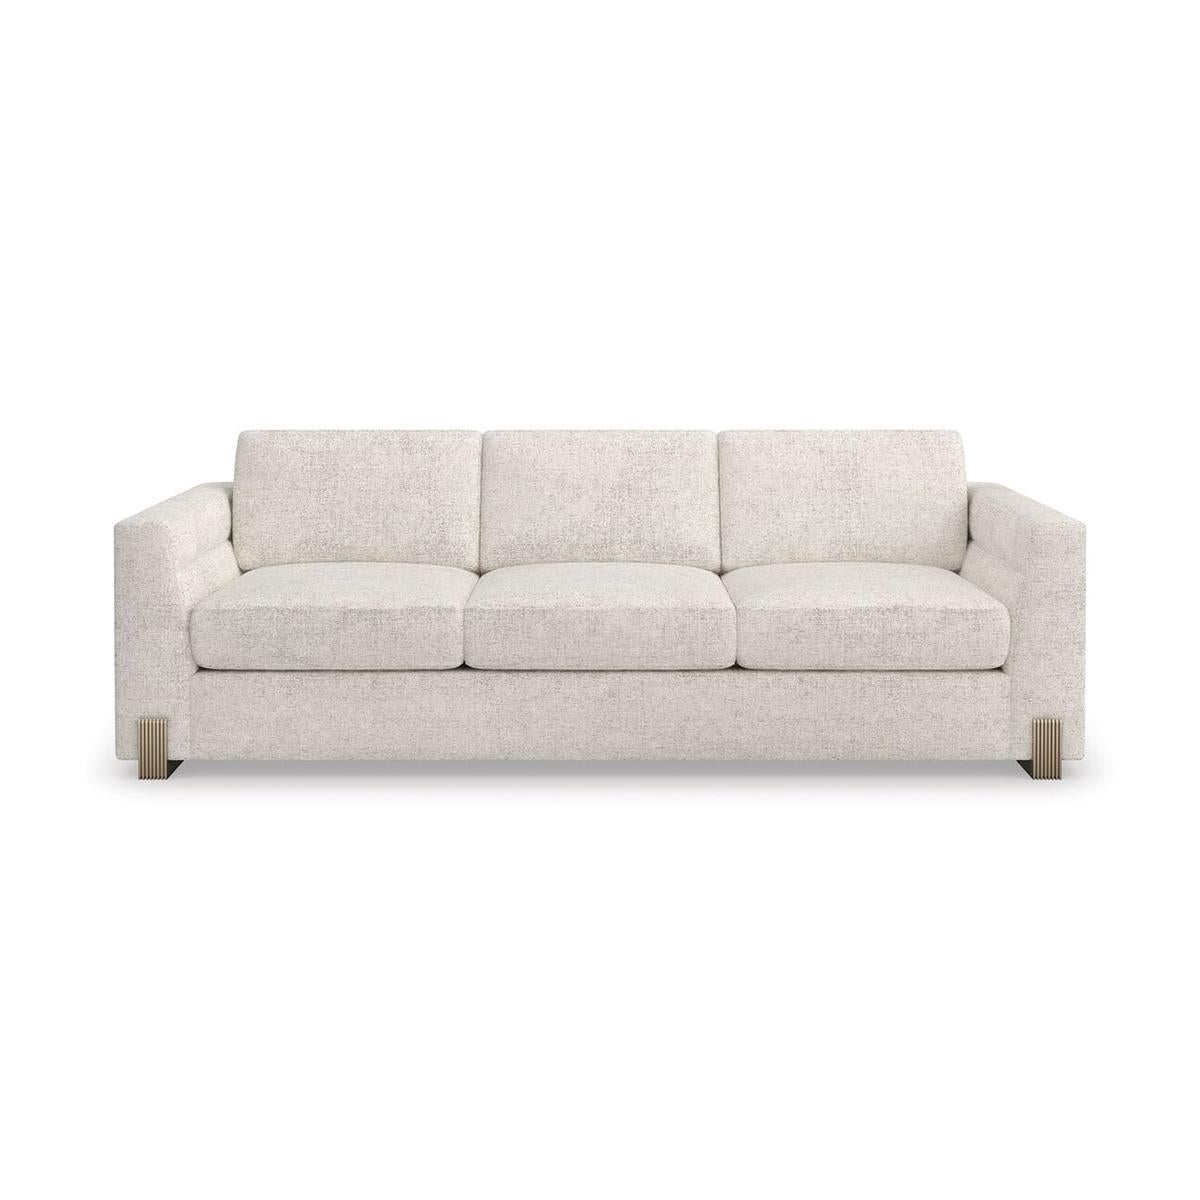 A refined mix of texture and material, the sofa is soft-lined yet sophisticated in an oatmeal melange woven fabric with subtle rust threading. Channel-tufted arms with a slightly angled taper comfortably enclose its loose seat back cushions, propped